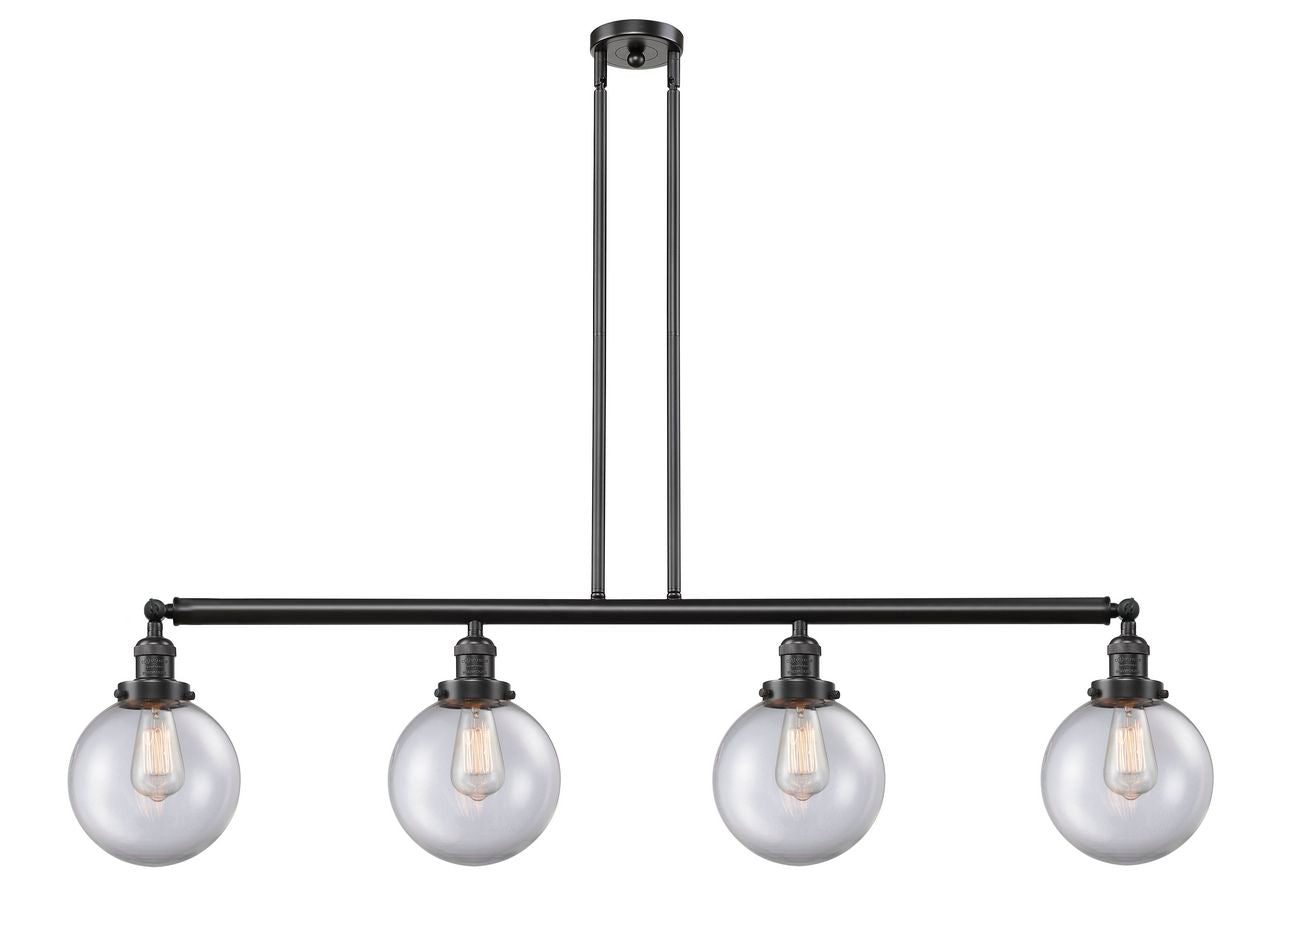 214-OB-G202-8 4-Light 52.625" Oil Rubbed Bronze Island Light - Clear Beacon Glass - LED Bulb - Dimmensions: 52.625 x 8 x 12.875<br>Minimum Height : 22<br>Maximum Height : 46 - Sloped Ceiling Compatible: Yes